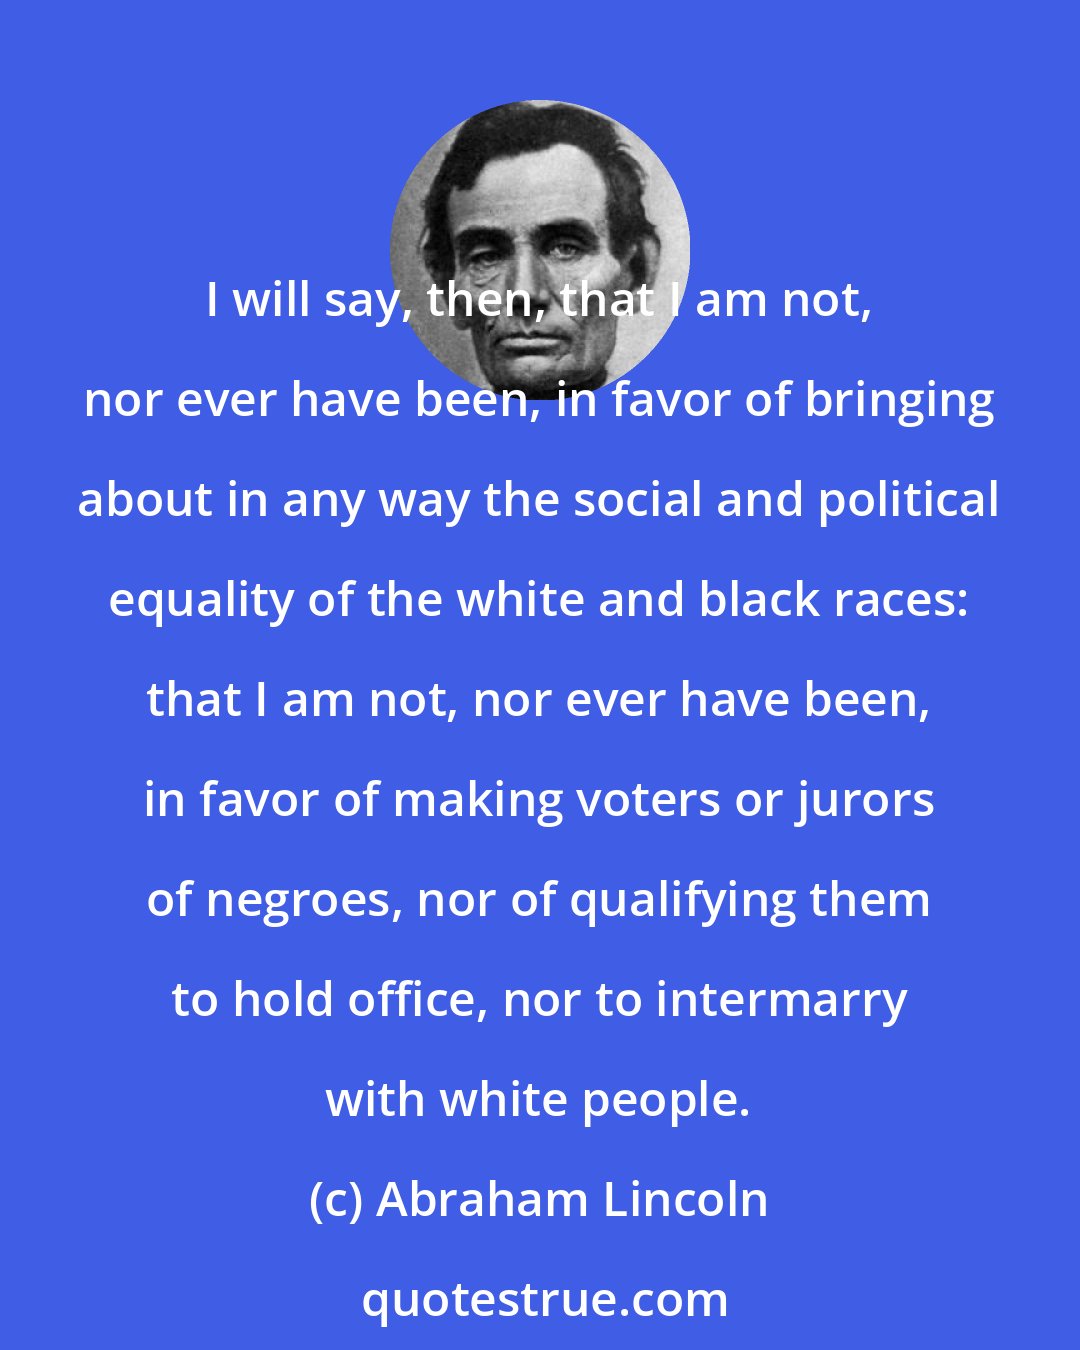 Abraham Lincoln: I will say, then, that I am not, nor ever have been, in favor of bringing about in any way the social and political equality of the white and black races: that I am not, nor ever have been, in favor of making voters or jurors of negroes, nor of qualifying them to hold office, nor to intermarry with white people.